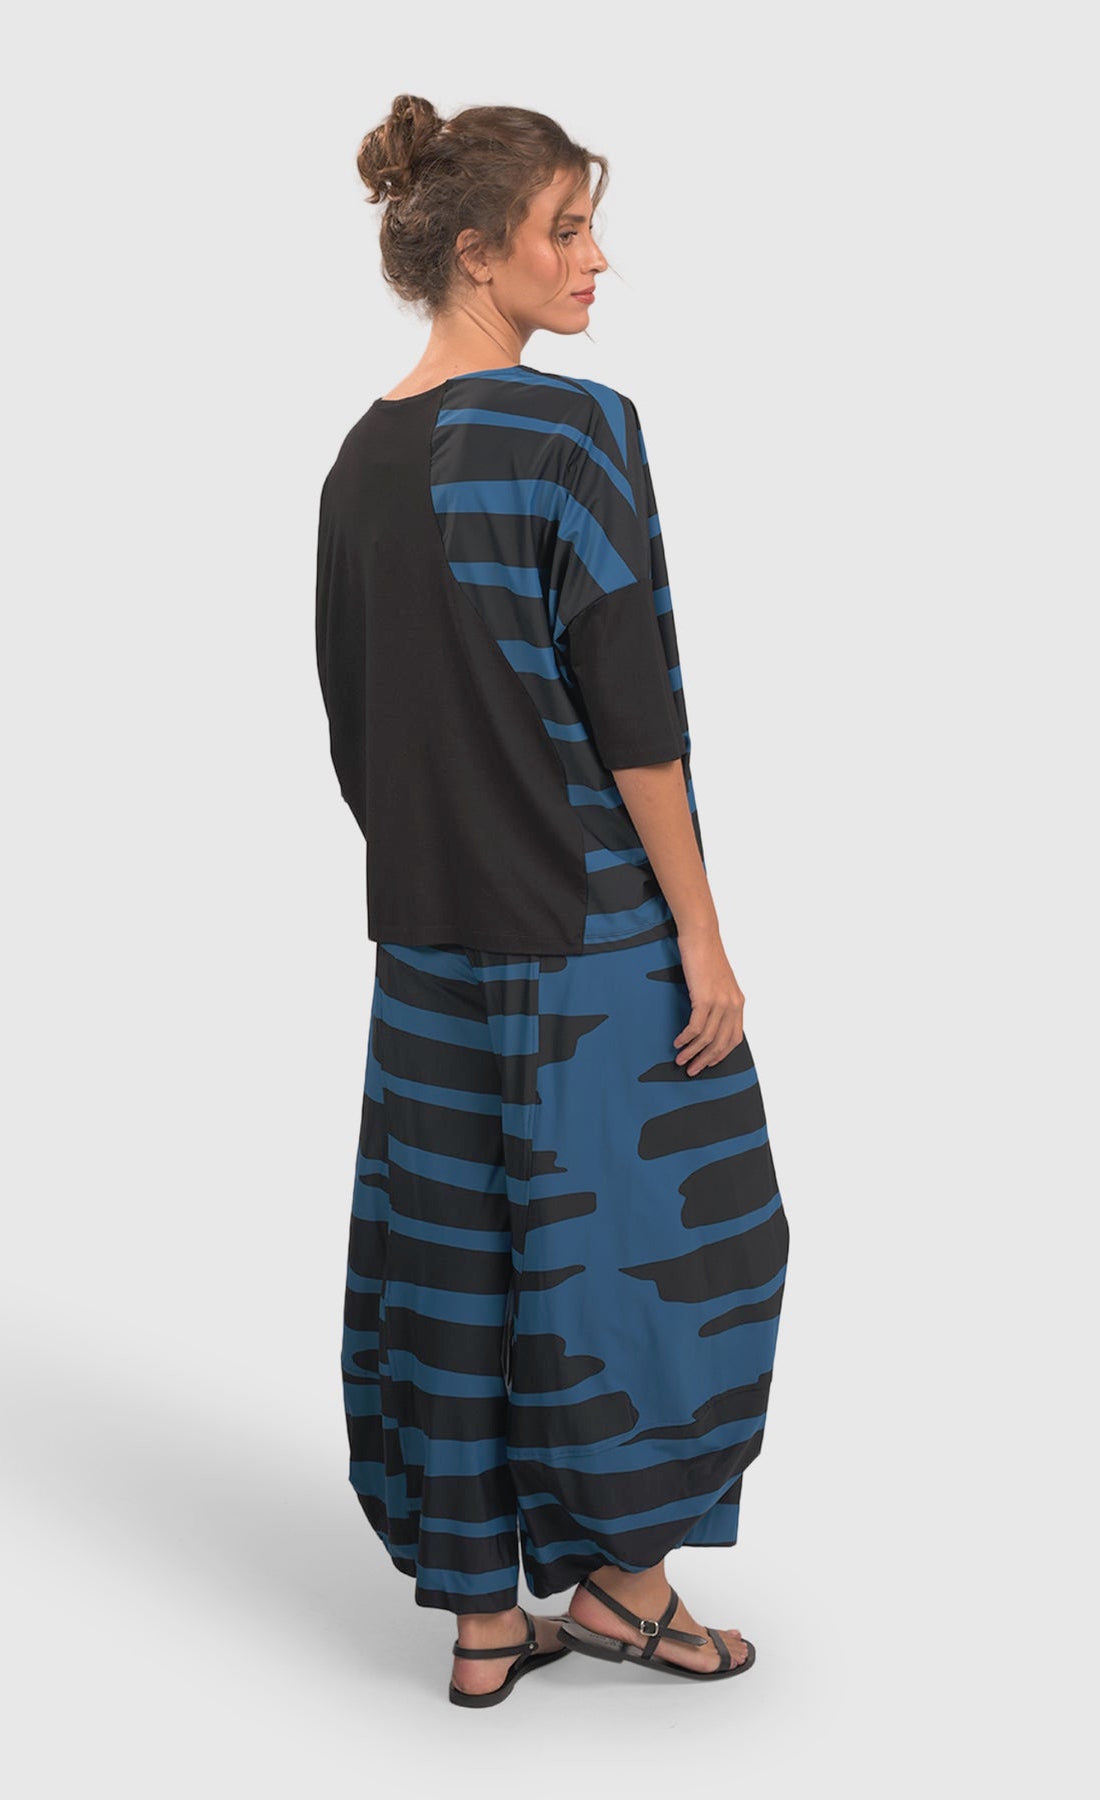 Back full body view of a woman wearing blue and black striped pants and the alembika tekbika ocean wave top. This top is black with a right sides wave paneling design in blue. The top also has drop shoulder, 3/4 length sleeves.